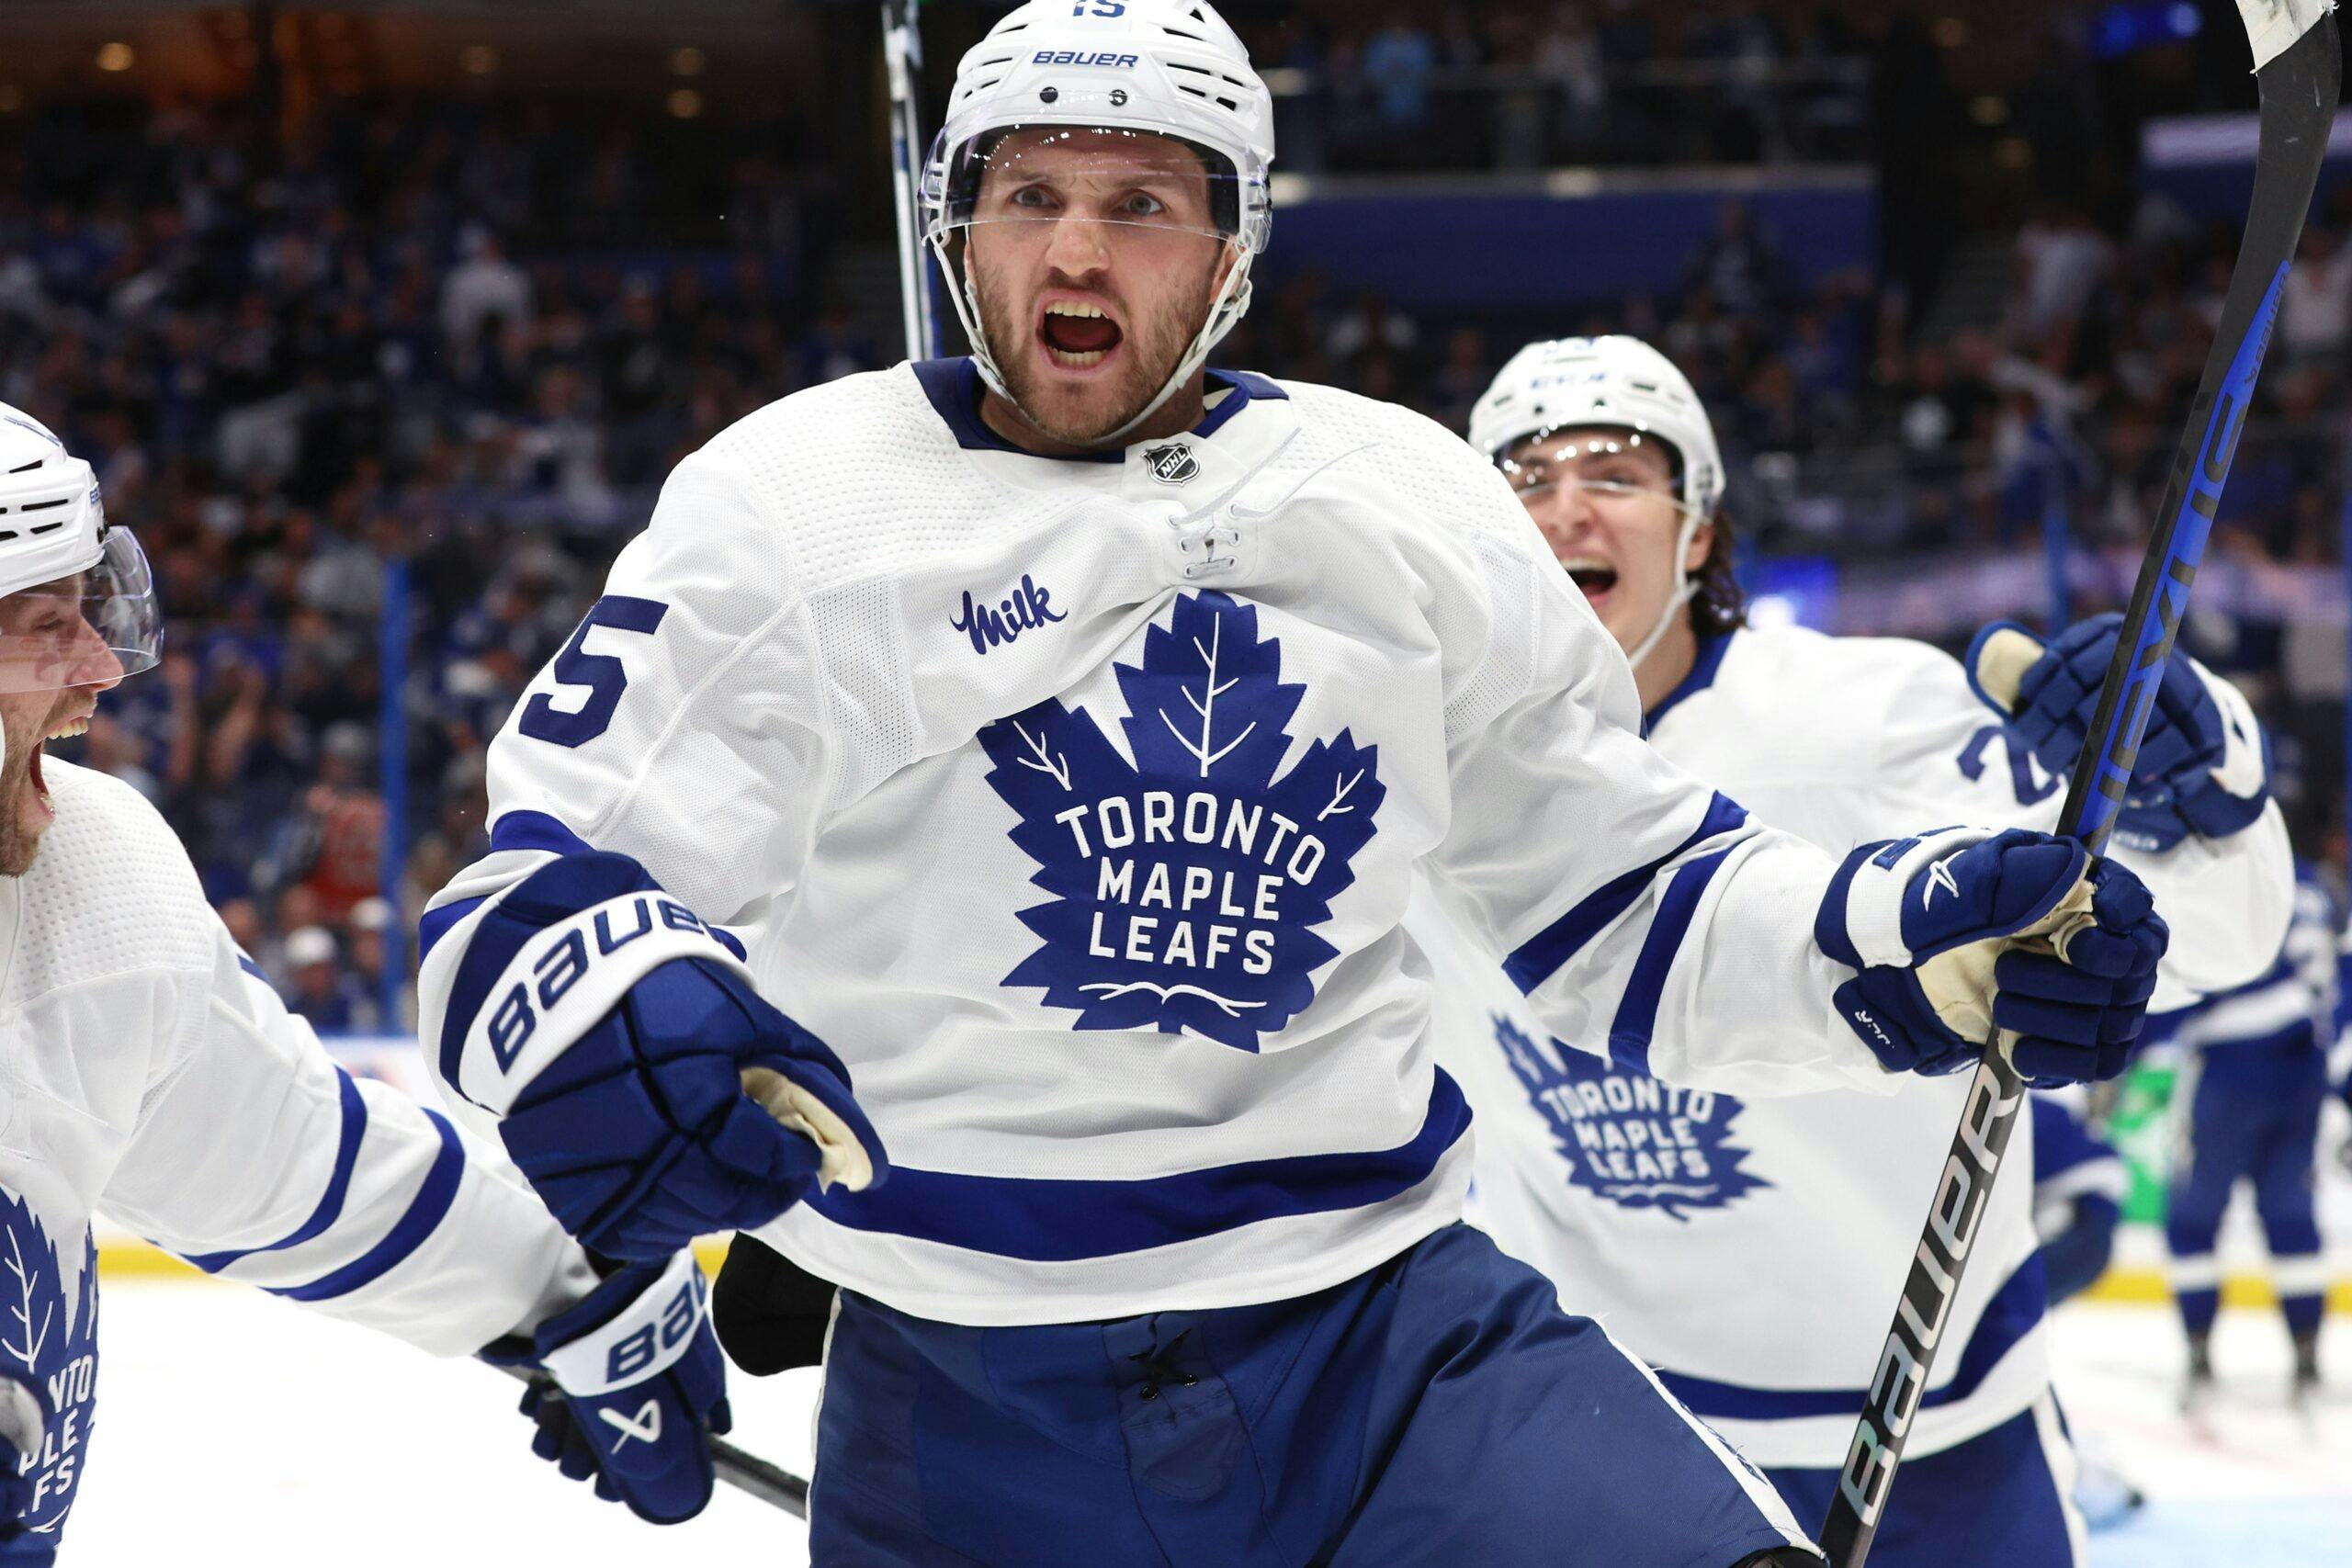 Toronto Maple Leafs win first NHL playoff series since 2004